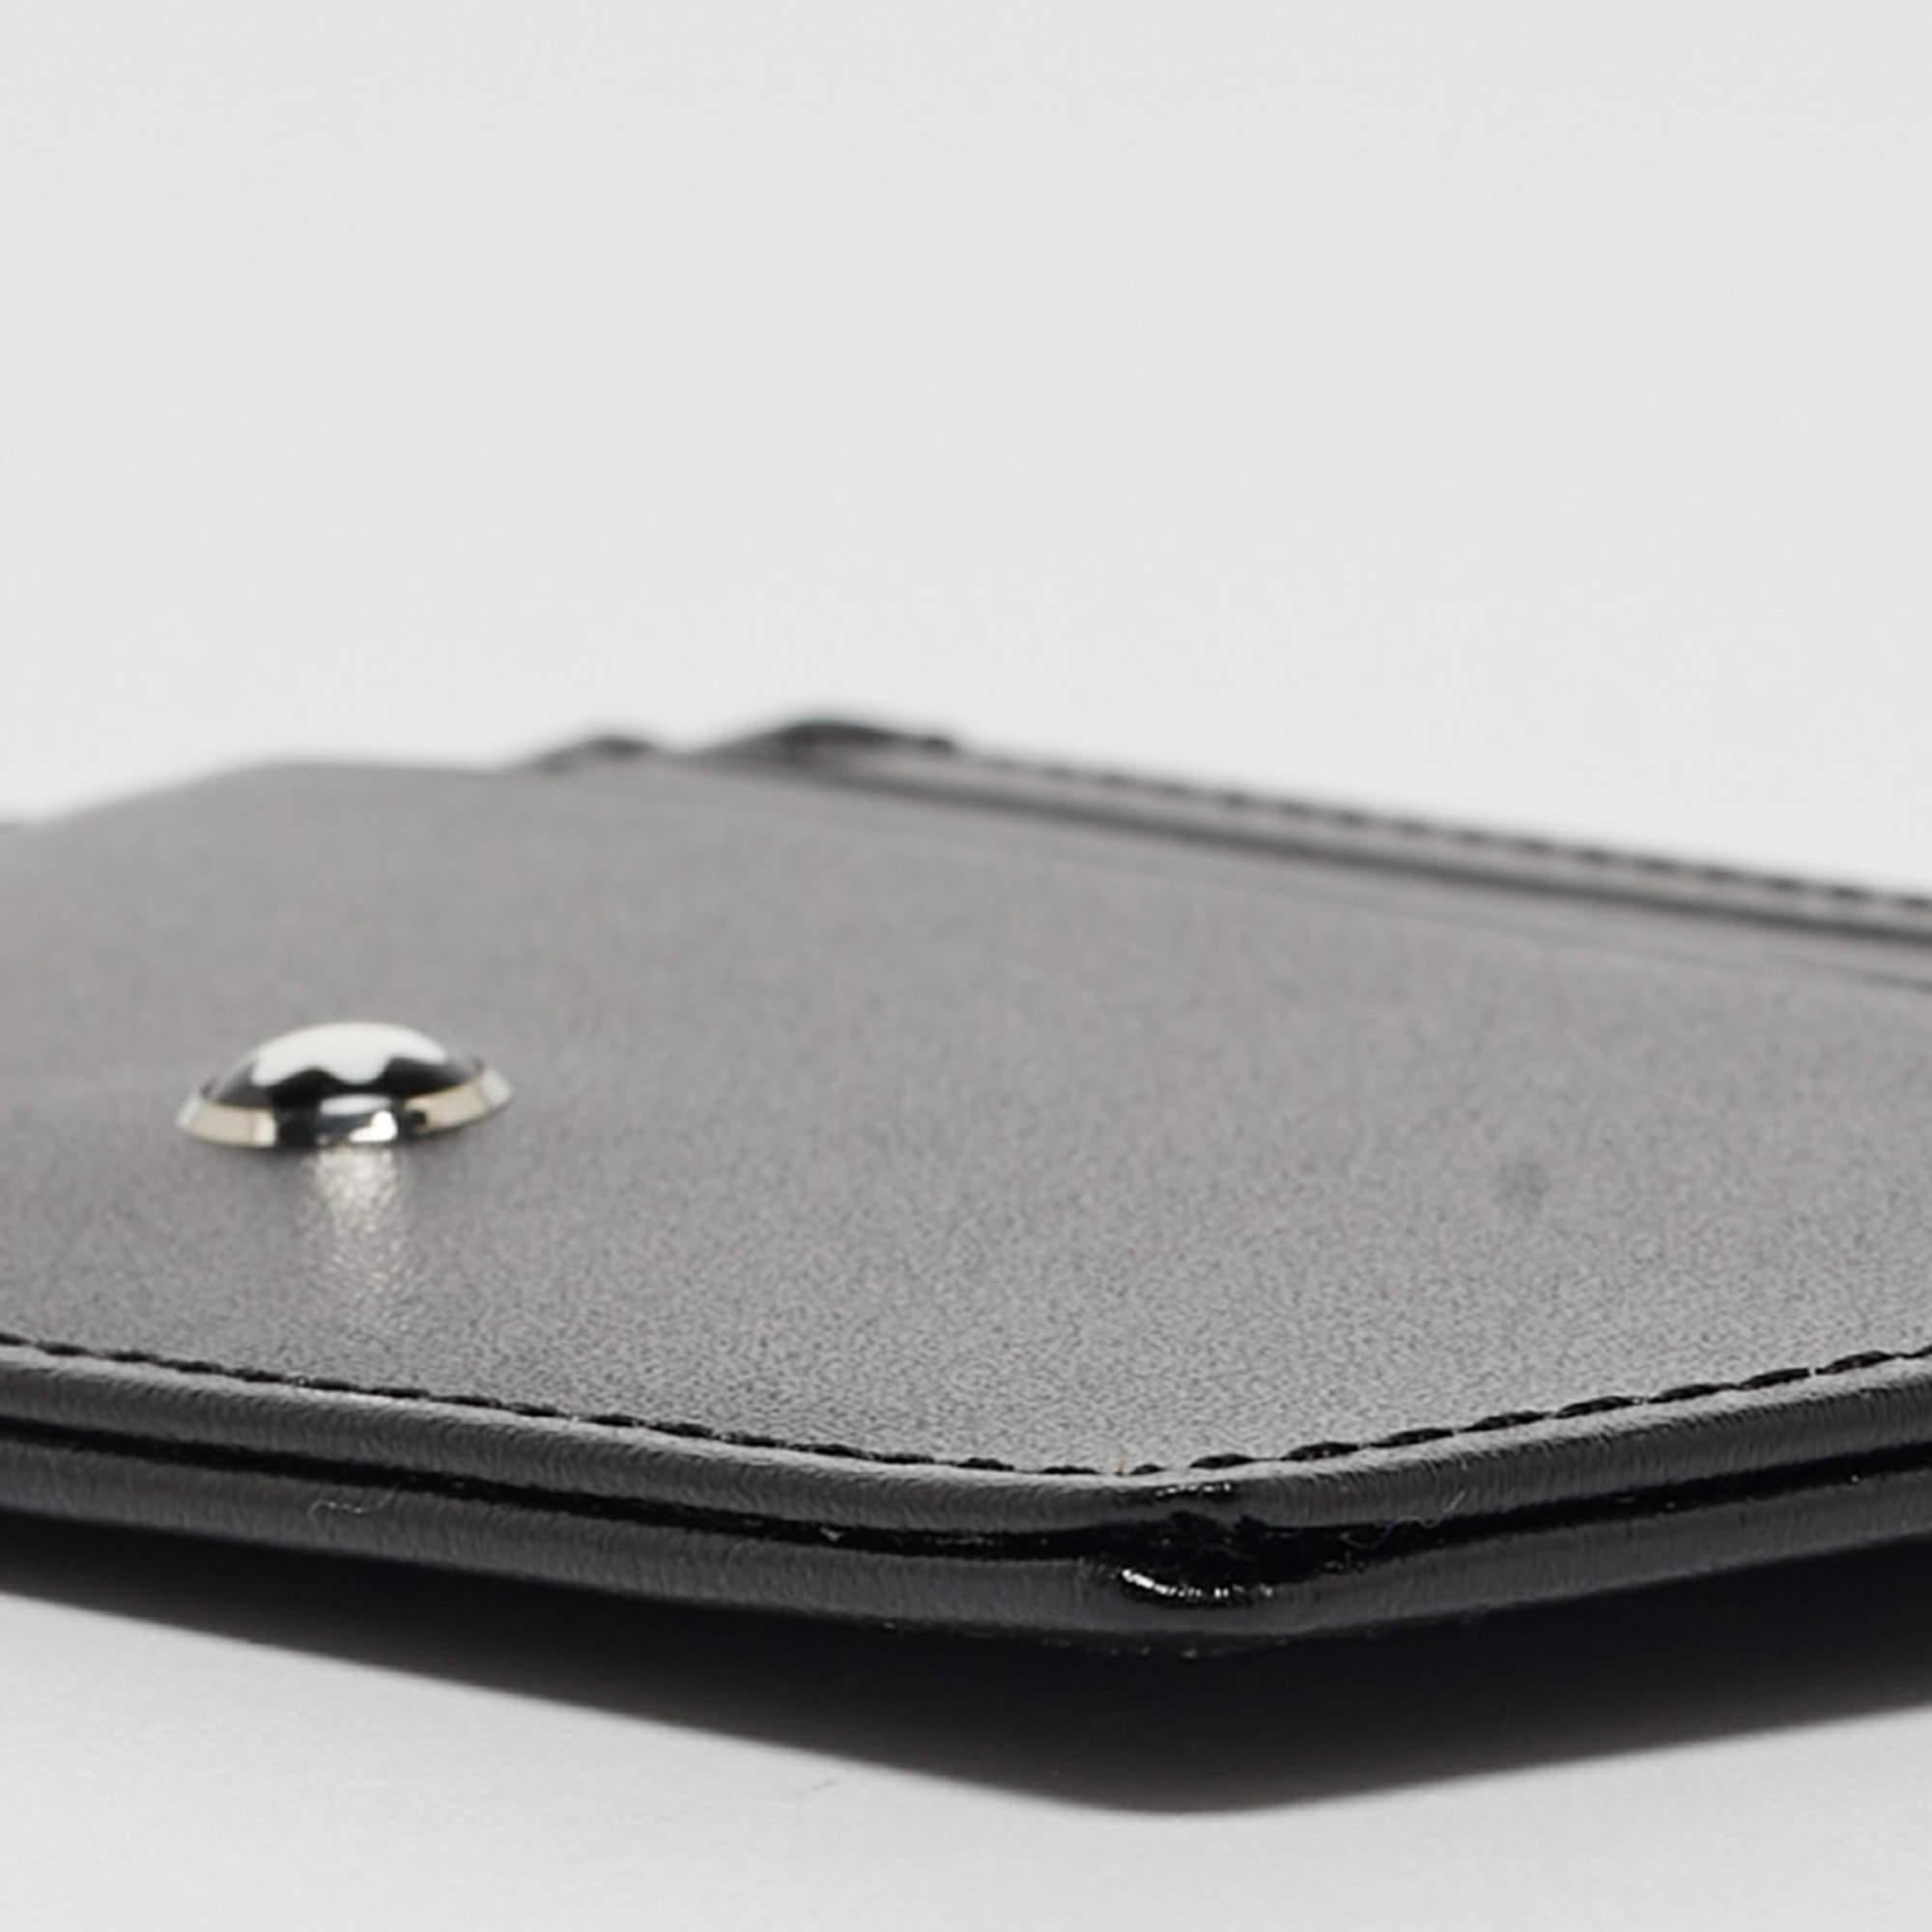 The Montblanc Meisterstück Pocket Holder 6CC epitomizes sophistication and functionality. Crafted from premium black leather, it boasts a sleek design with space to elegantly hold credit cards. Its timeless elegance and superior craftsmanship make